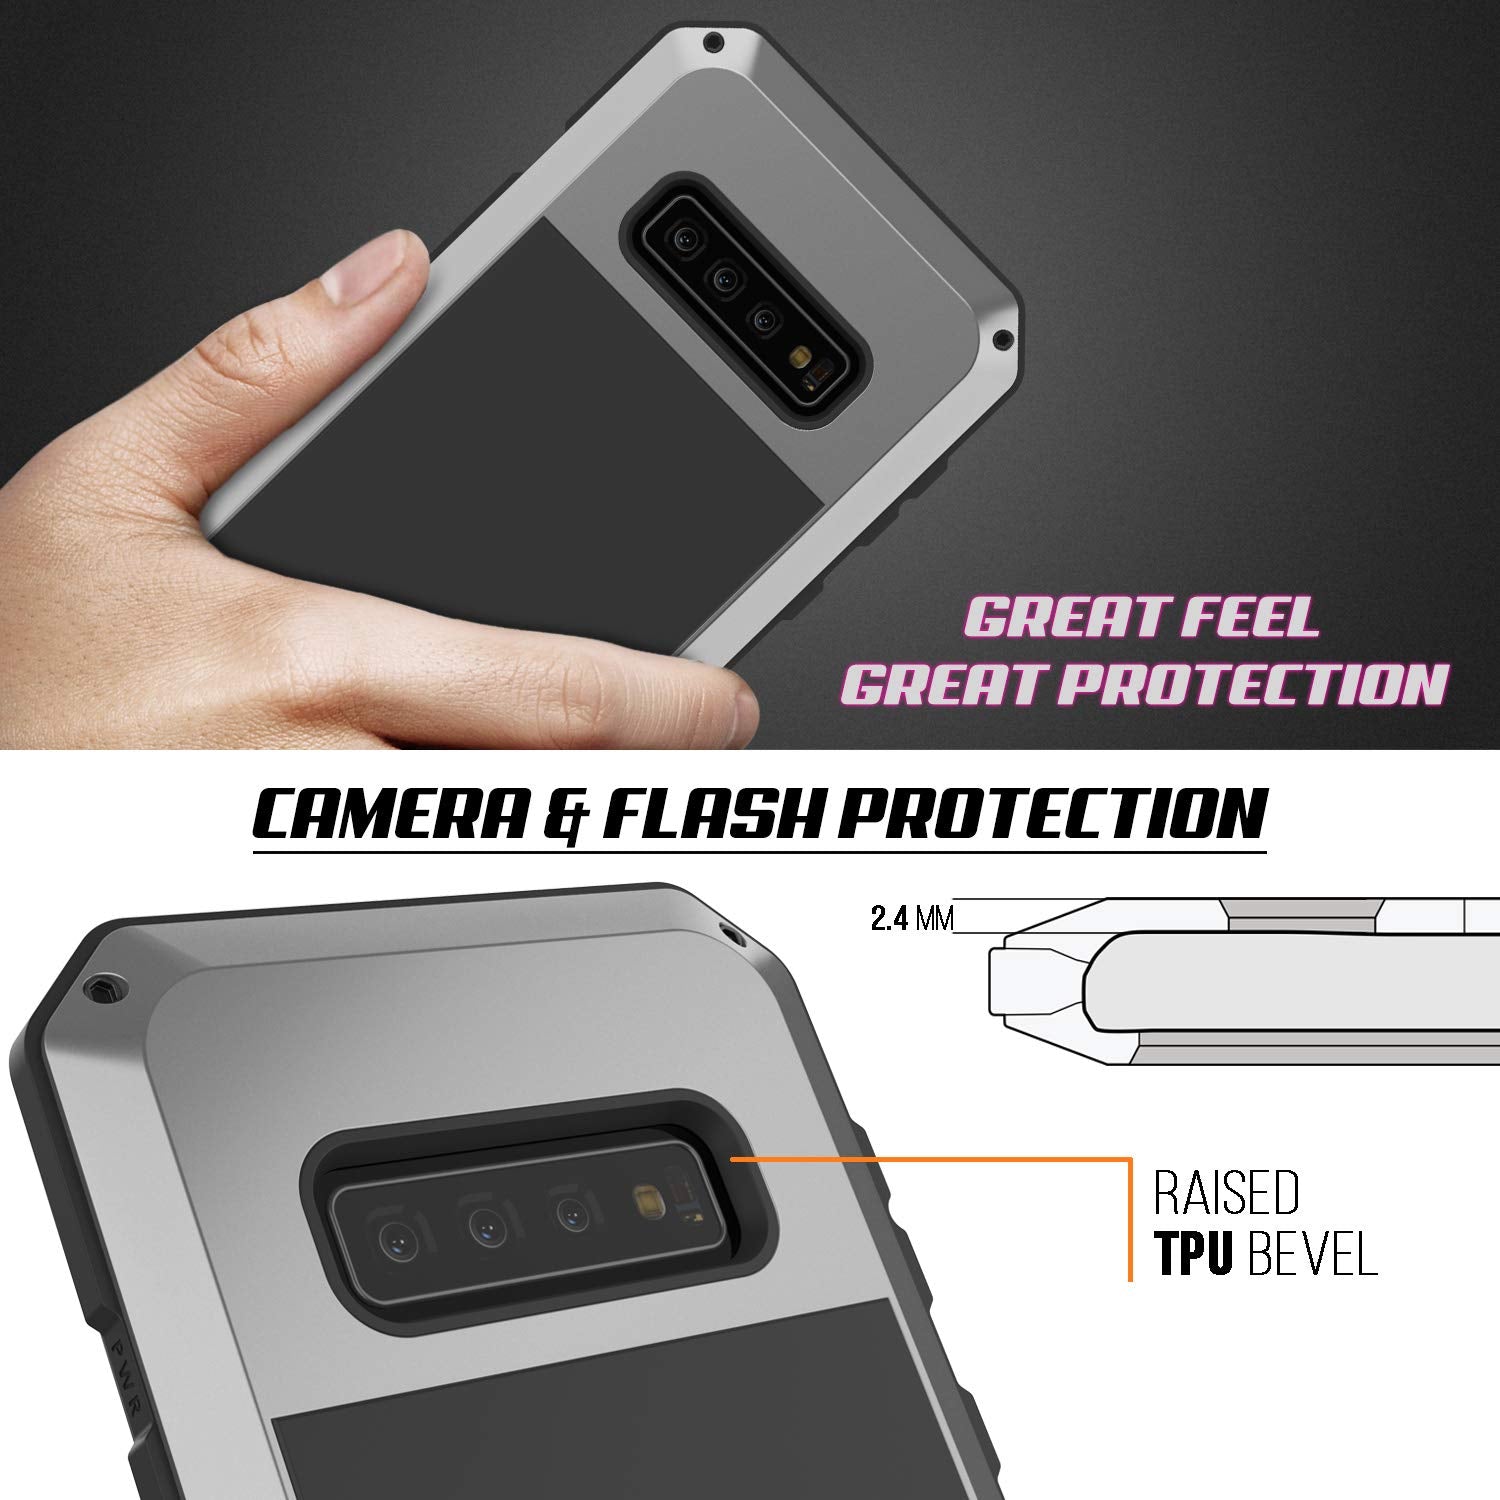 Galaxy S10 Metal Case, Heavy Duty Military Grade Rugged Armor Cover [Silver]